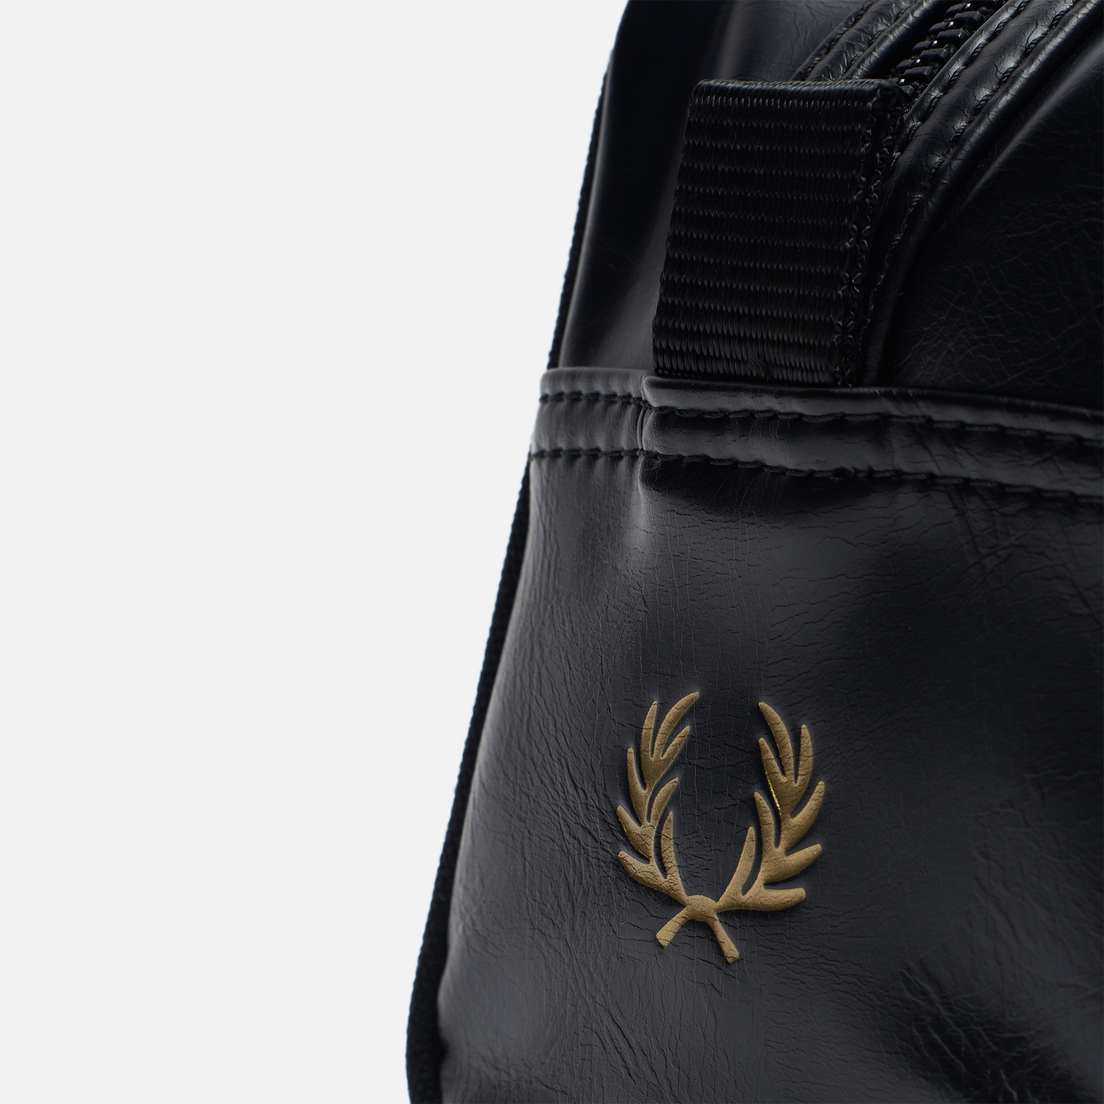 Fred Perry Косметичка Branded Wash